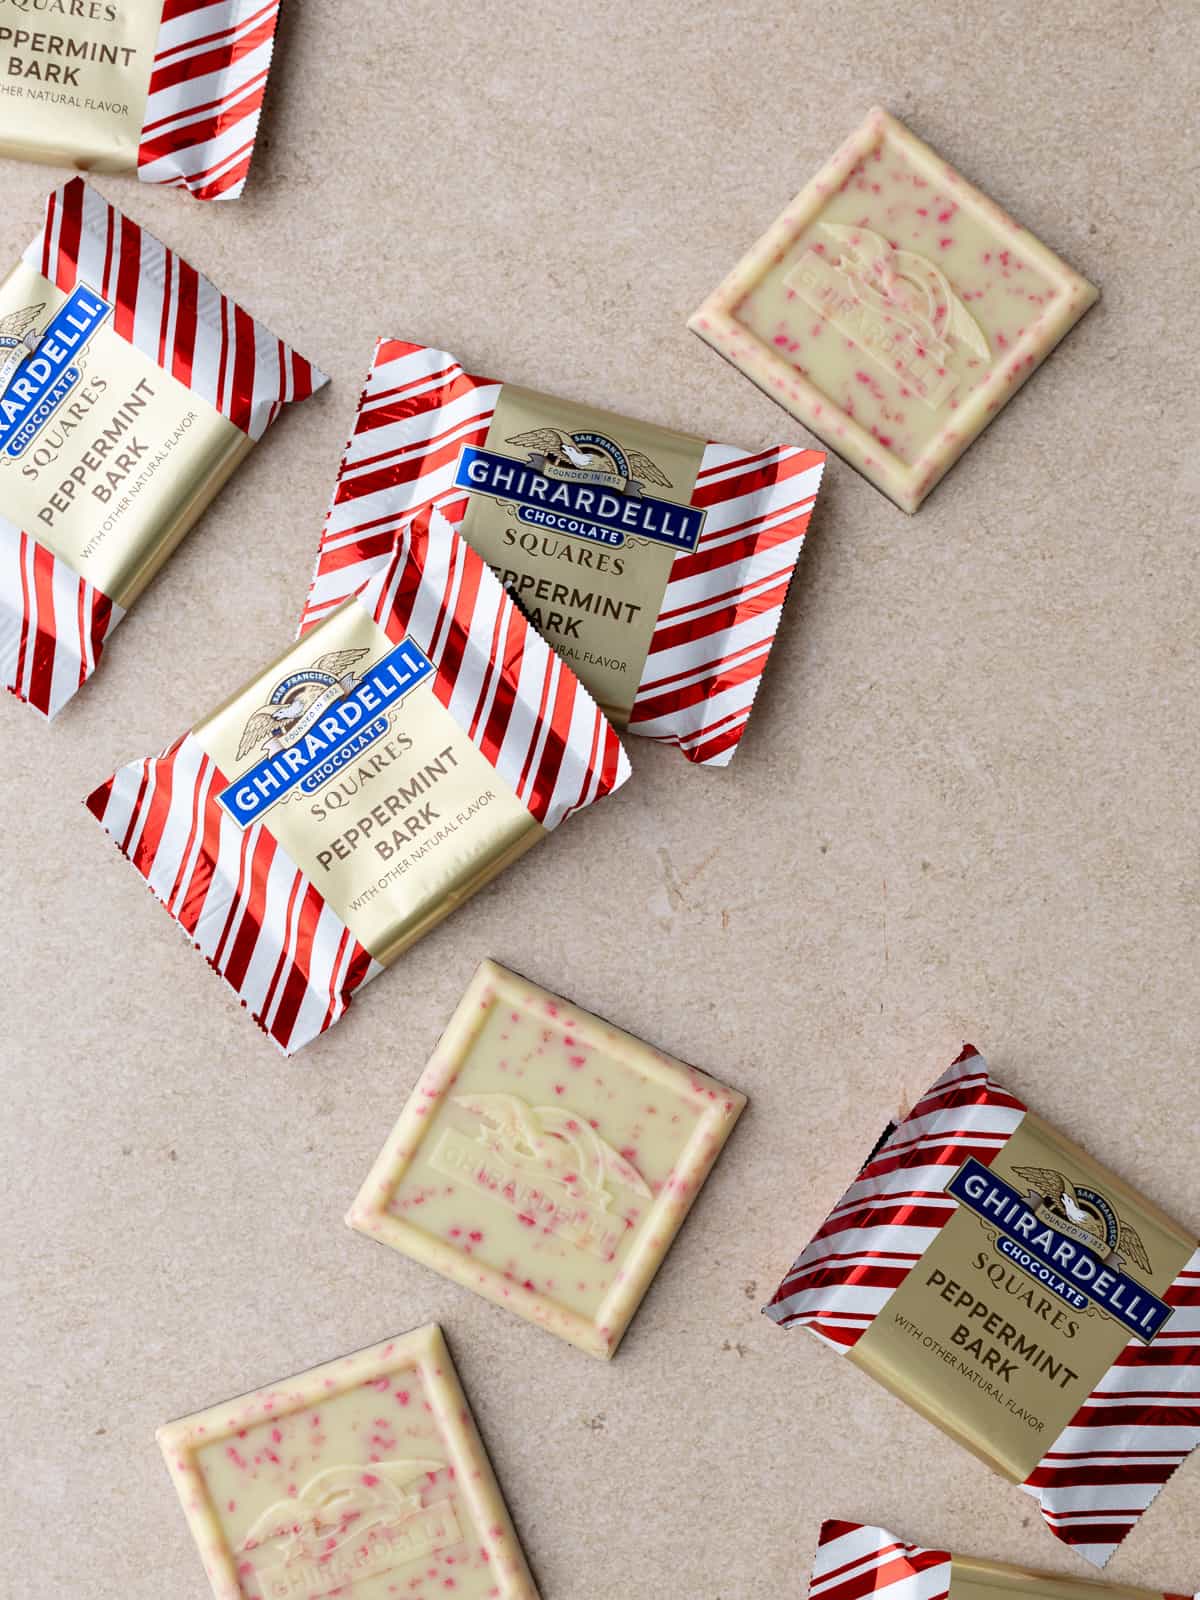 Ghirardelli peppermint bark squares